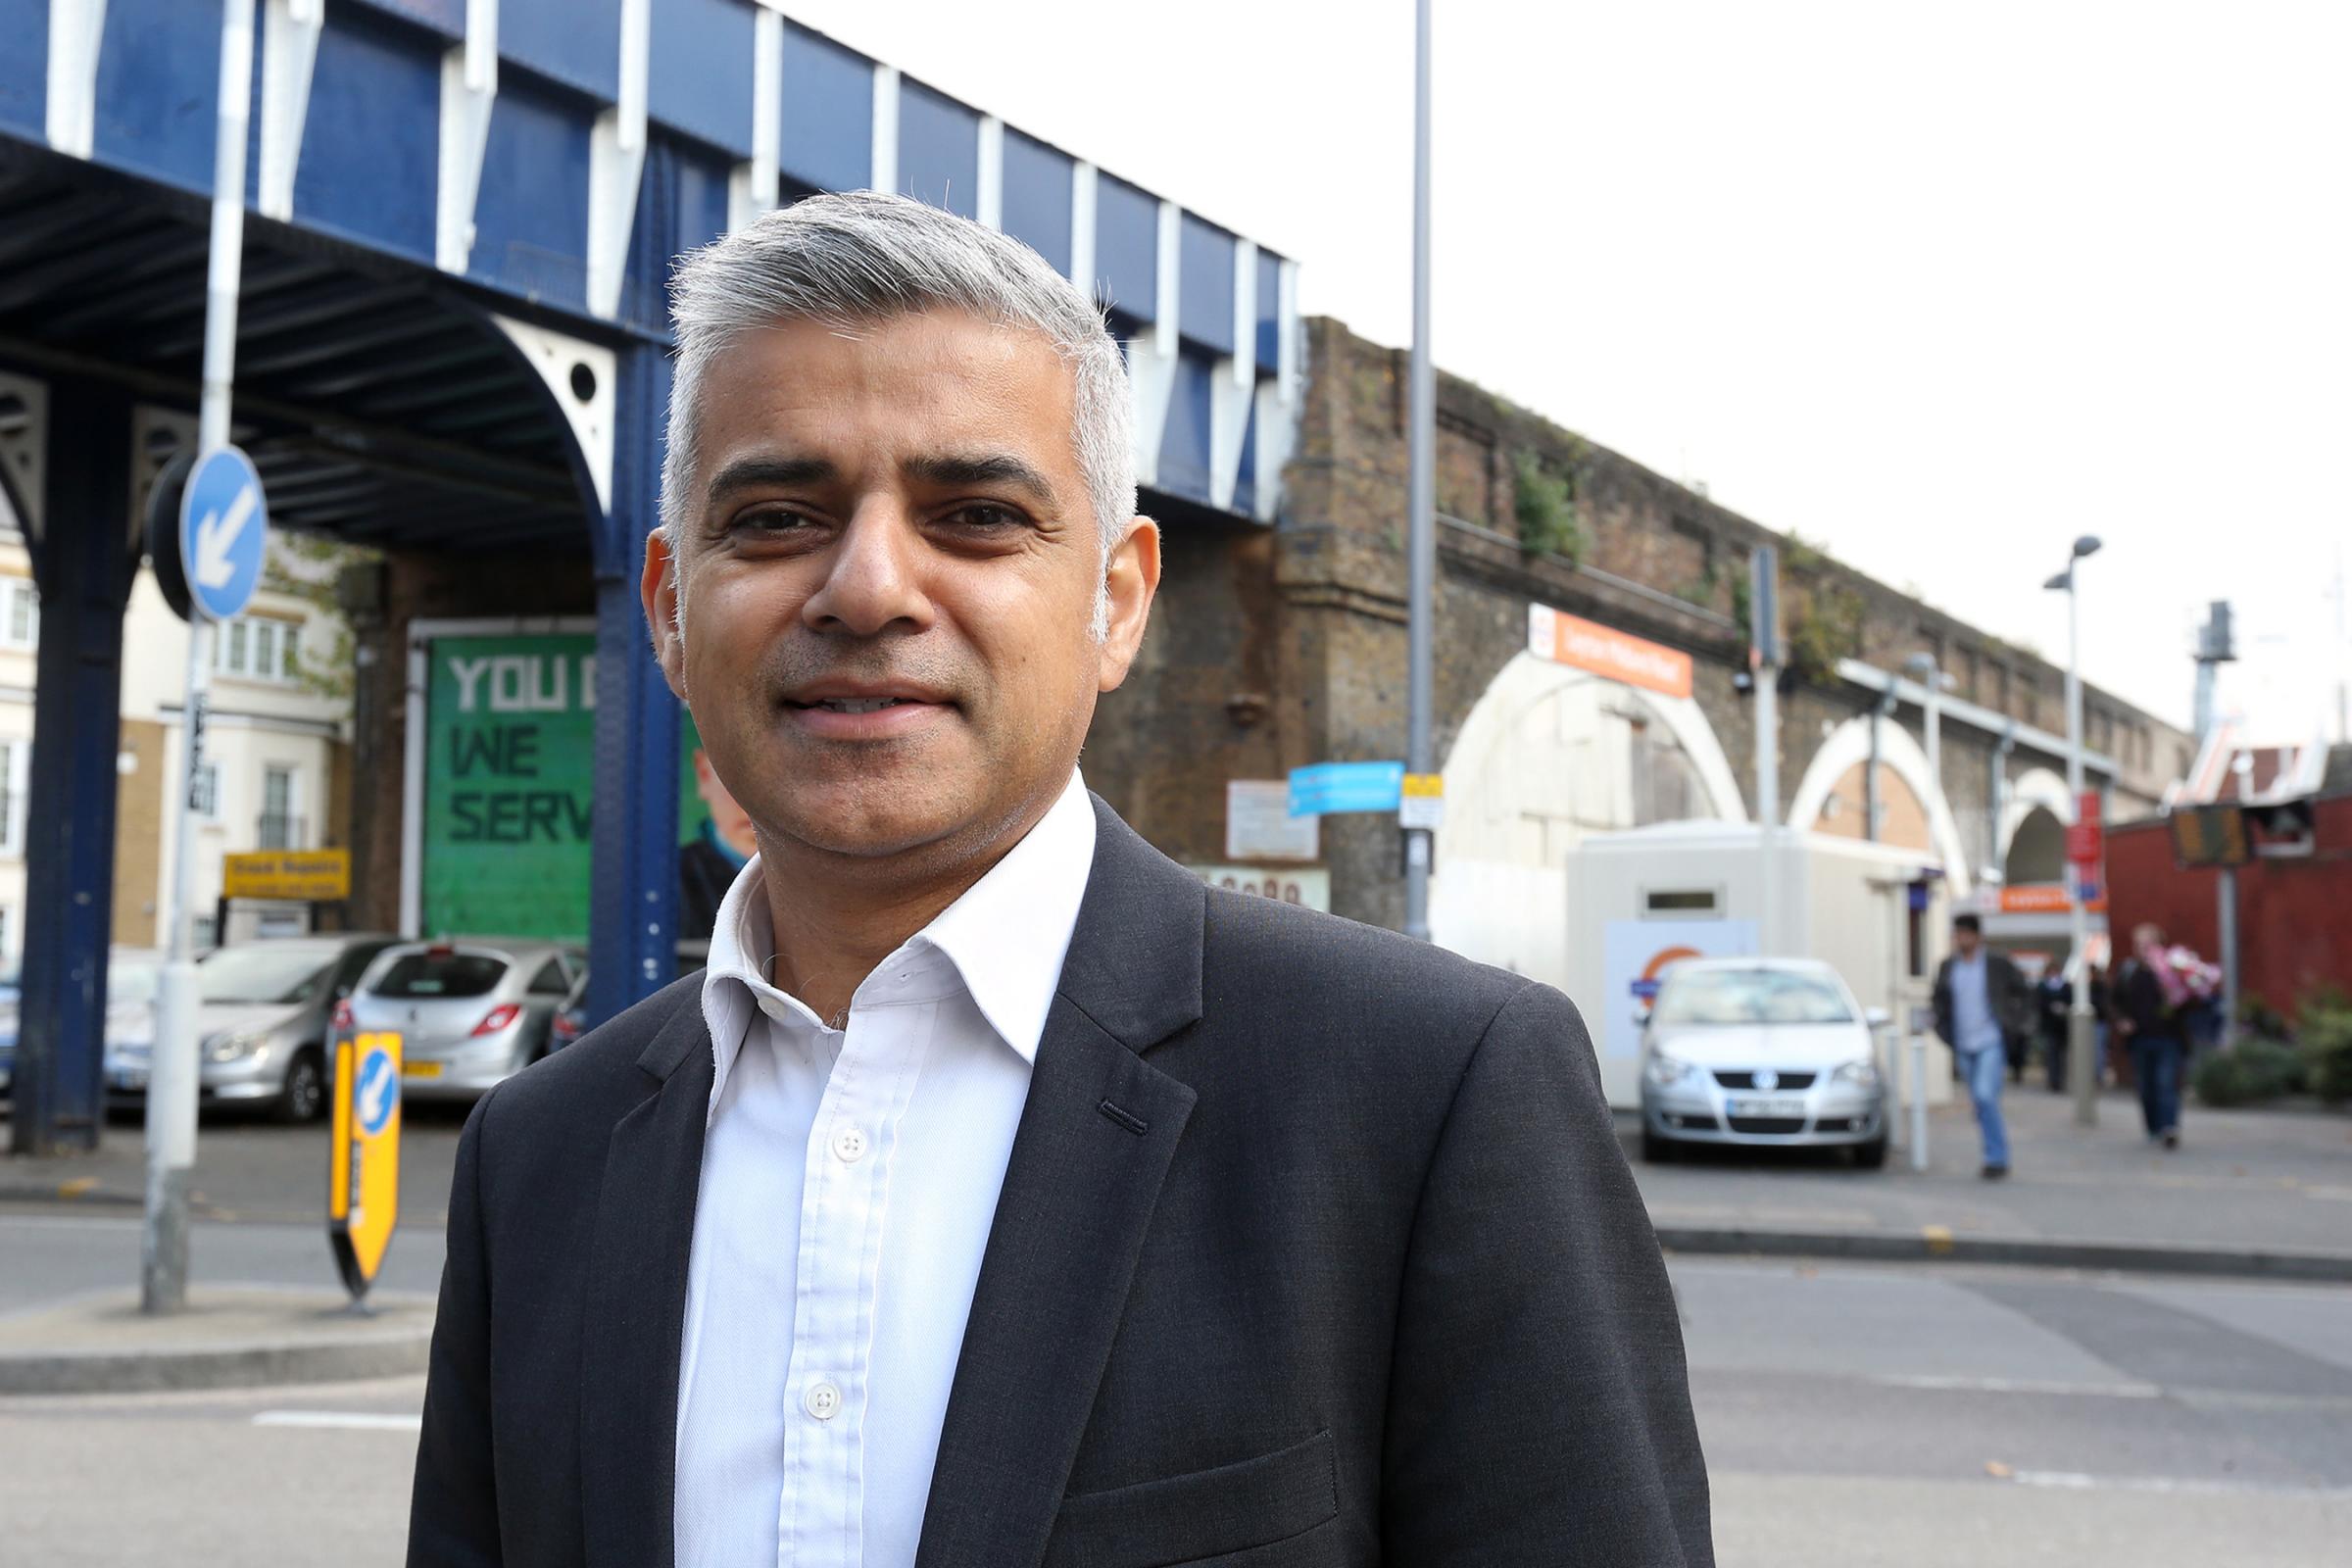 Mayor of London Sadiq Khan announced that a new package of measures would be carried out by the Violence Reduction Unit over the next 12 months